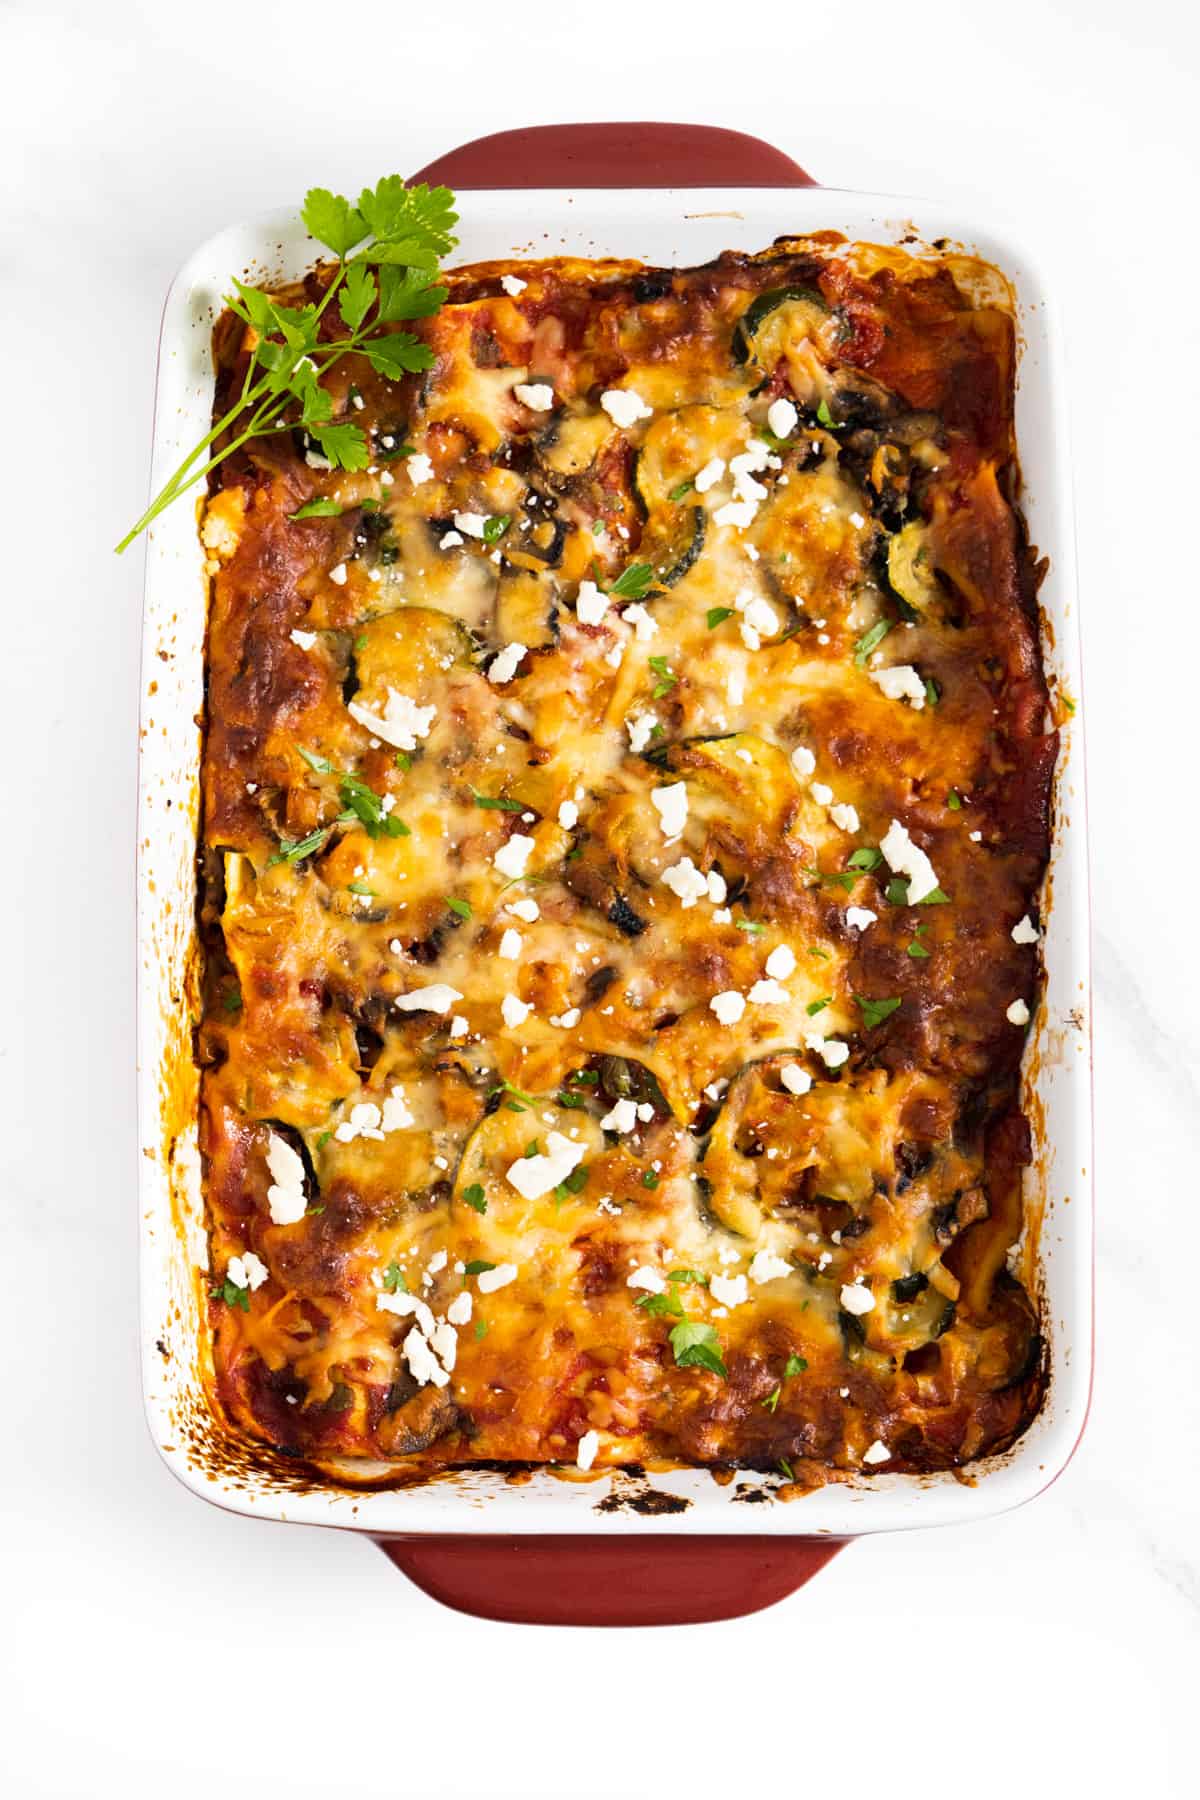 cooked lasagna with some feta and parsley on top.